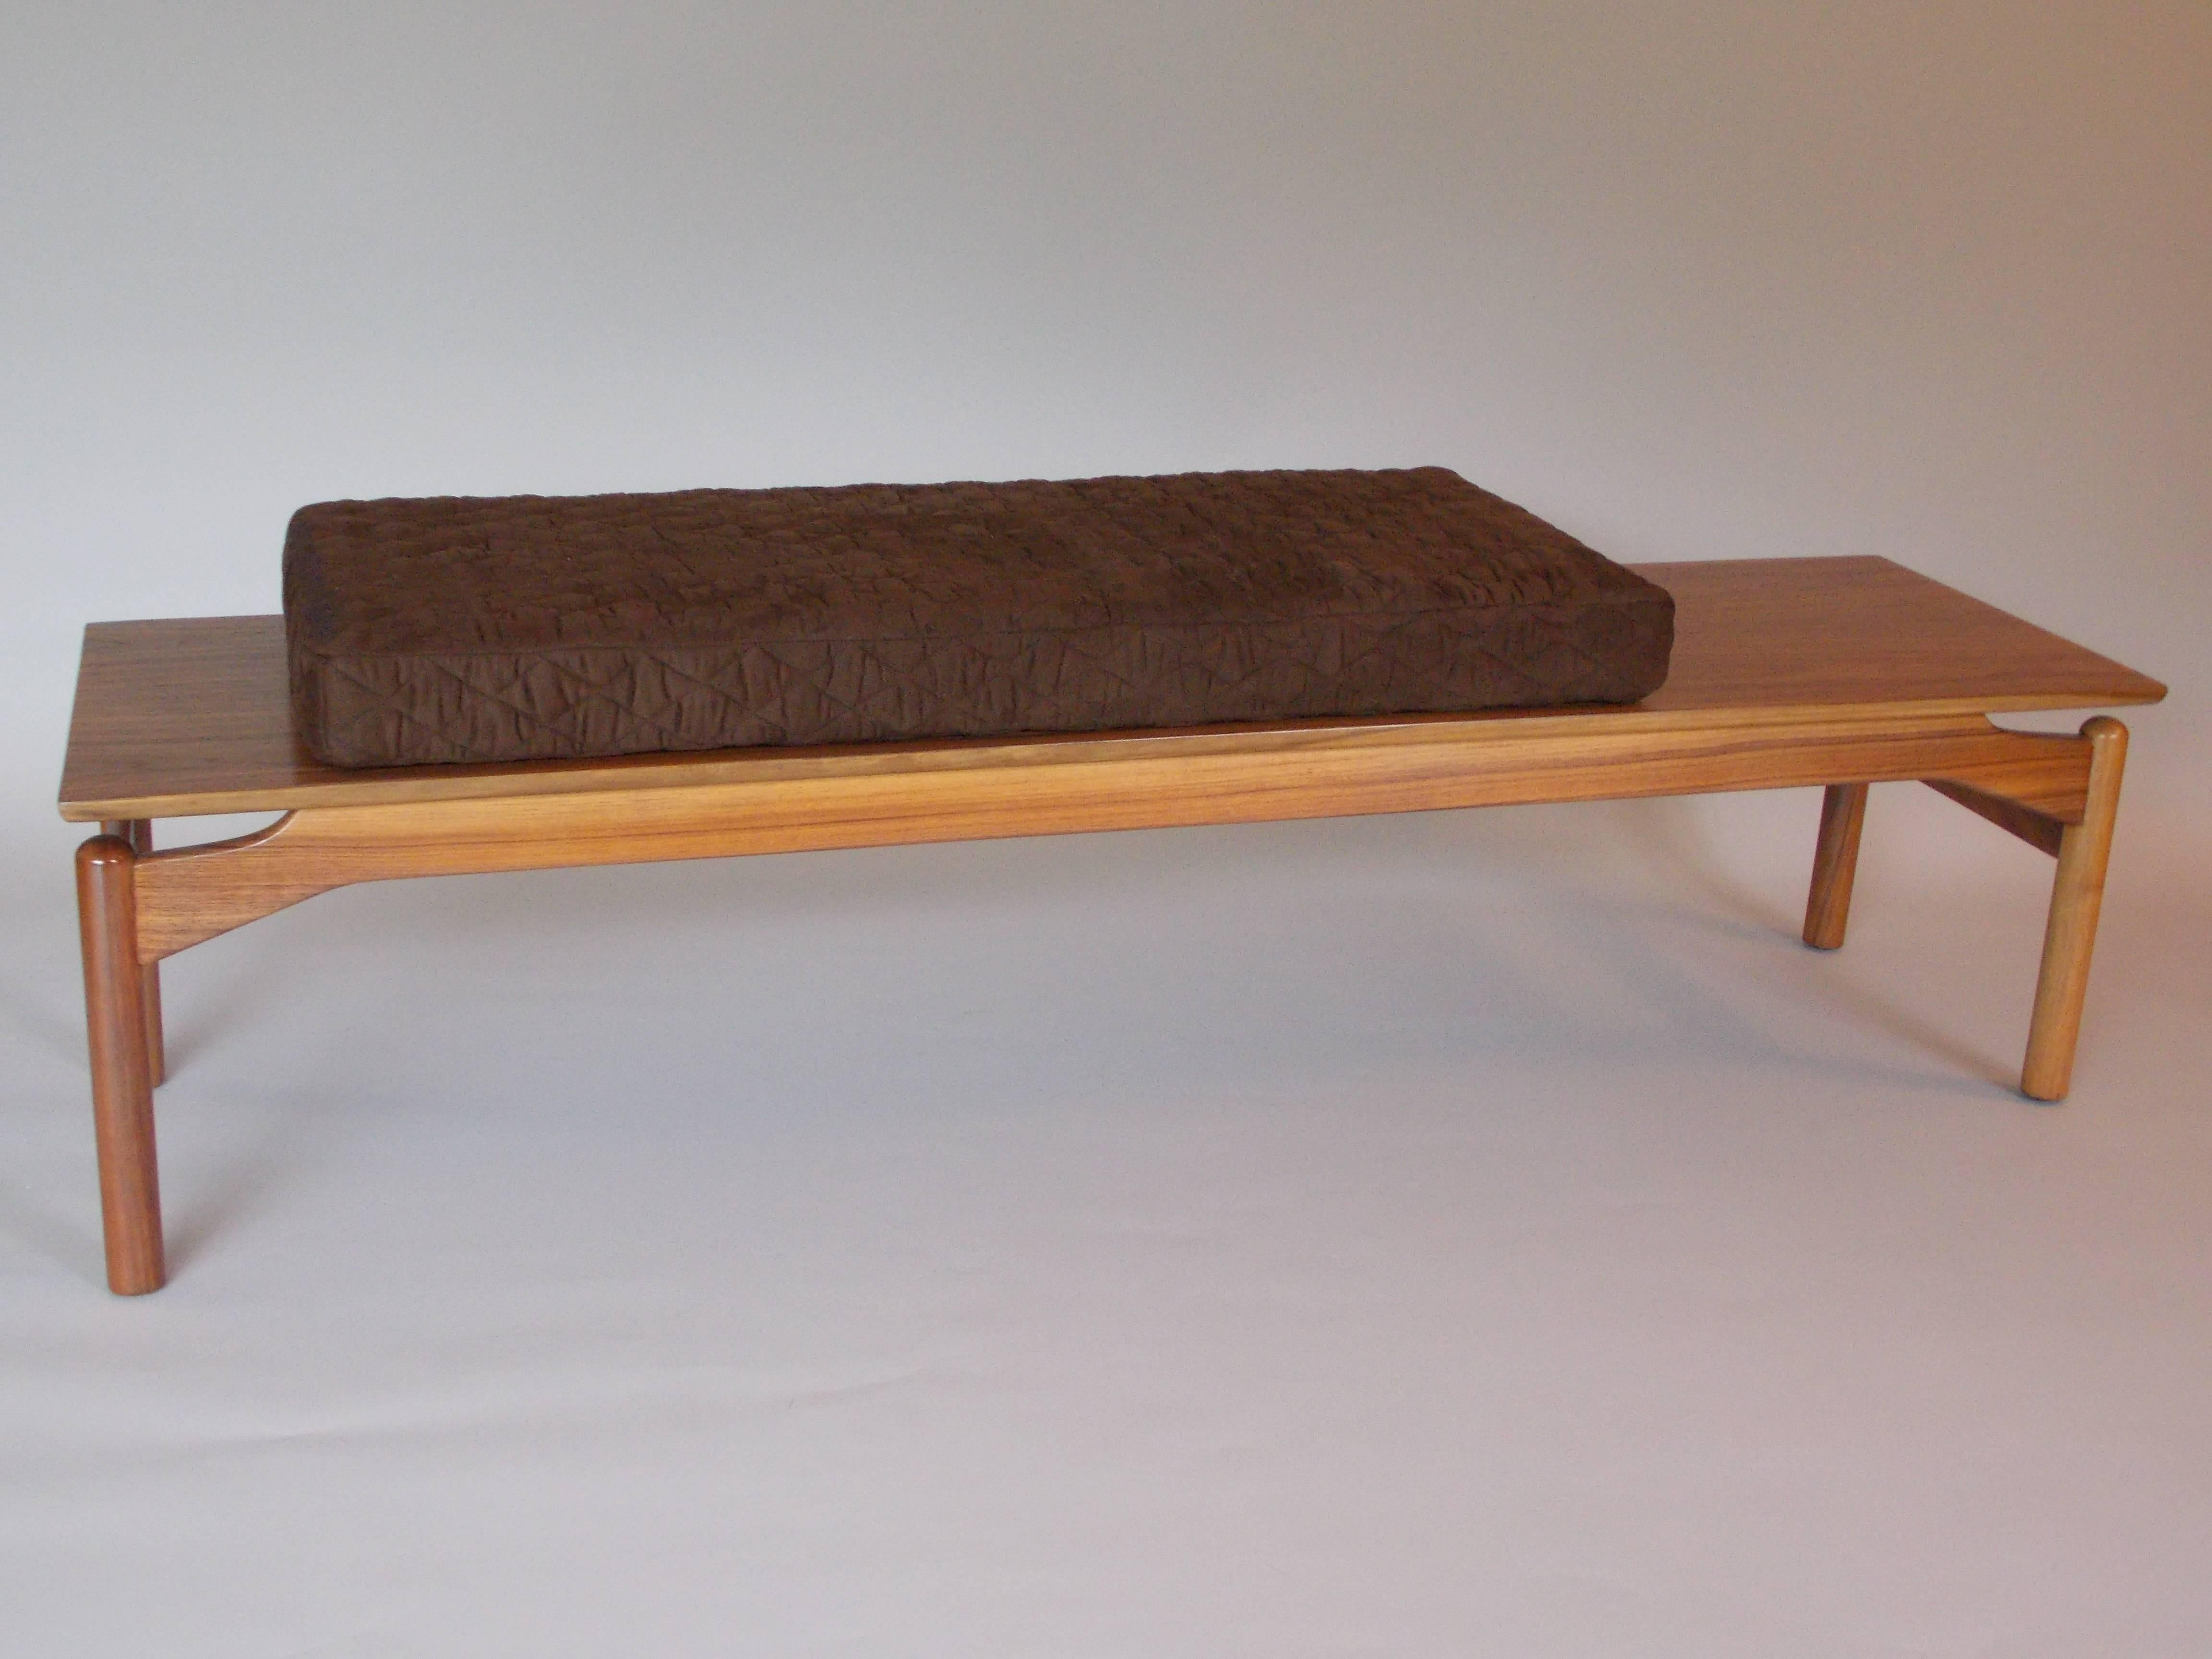 A great design.
Made of walnut with new upholstered cushion.
The wood has been restored with a natural finish.
It also has a nice grain pattern.
The cushion was made at a medium scale for occasional seating and positioning on the bench.
Great to use